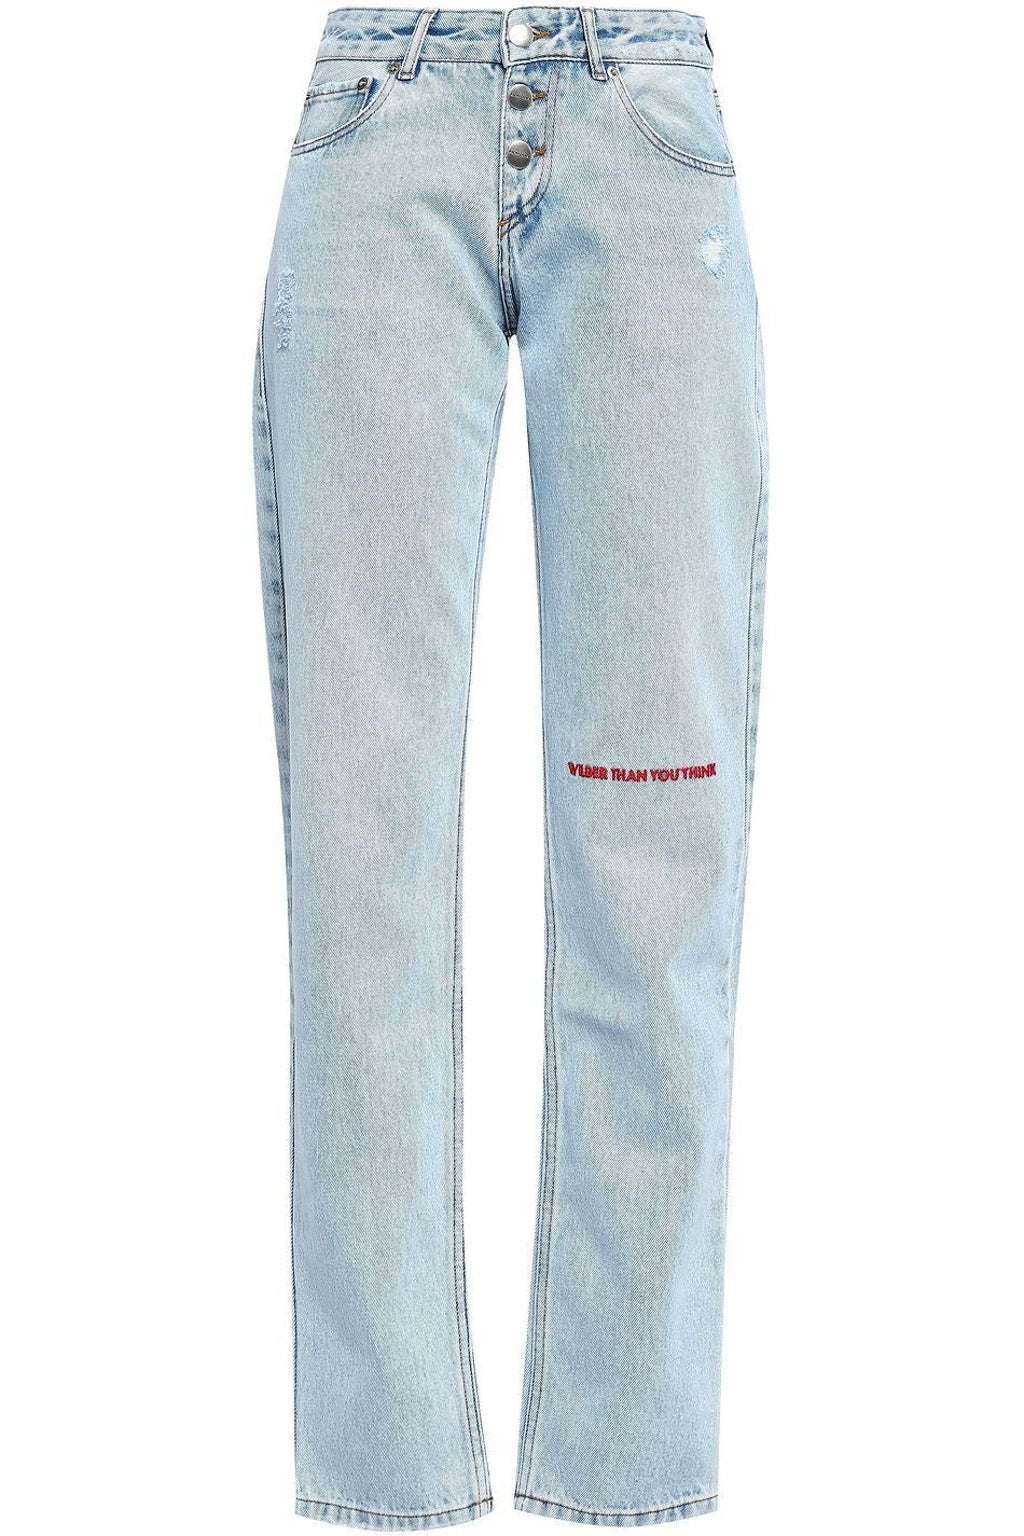 Wilder Than You Think Jeans